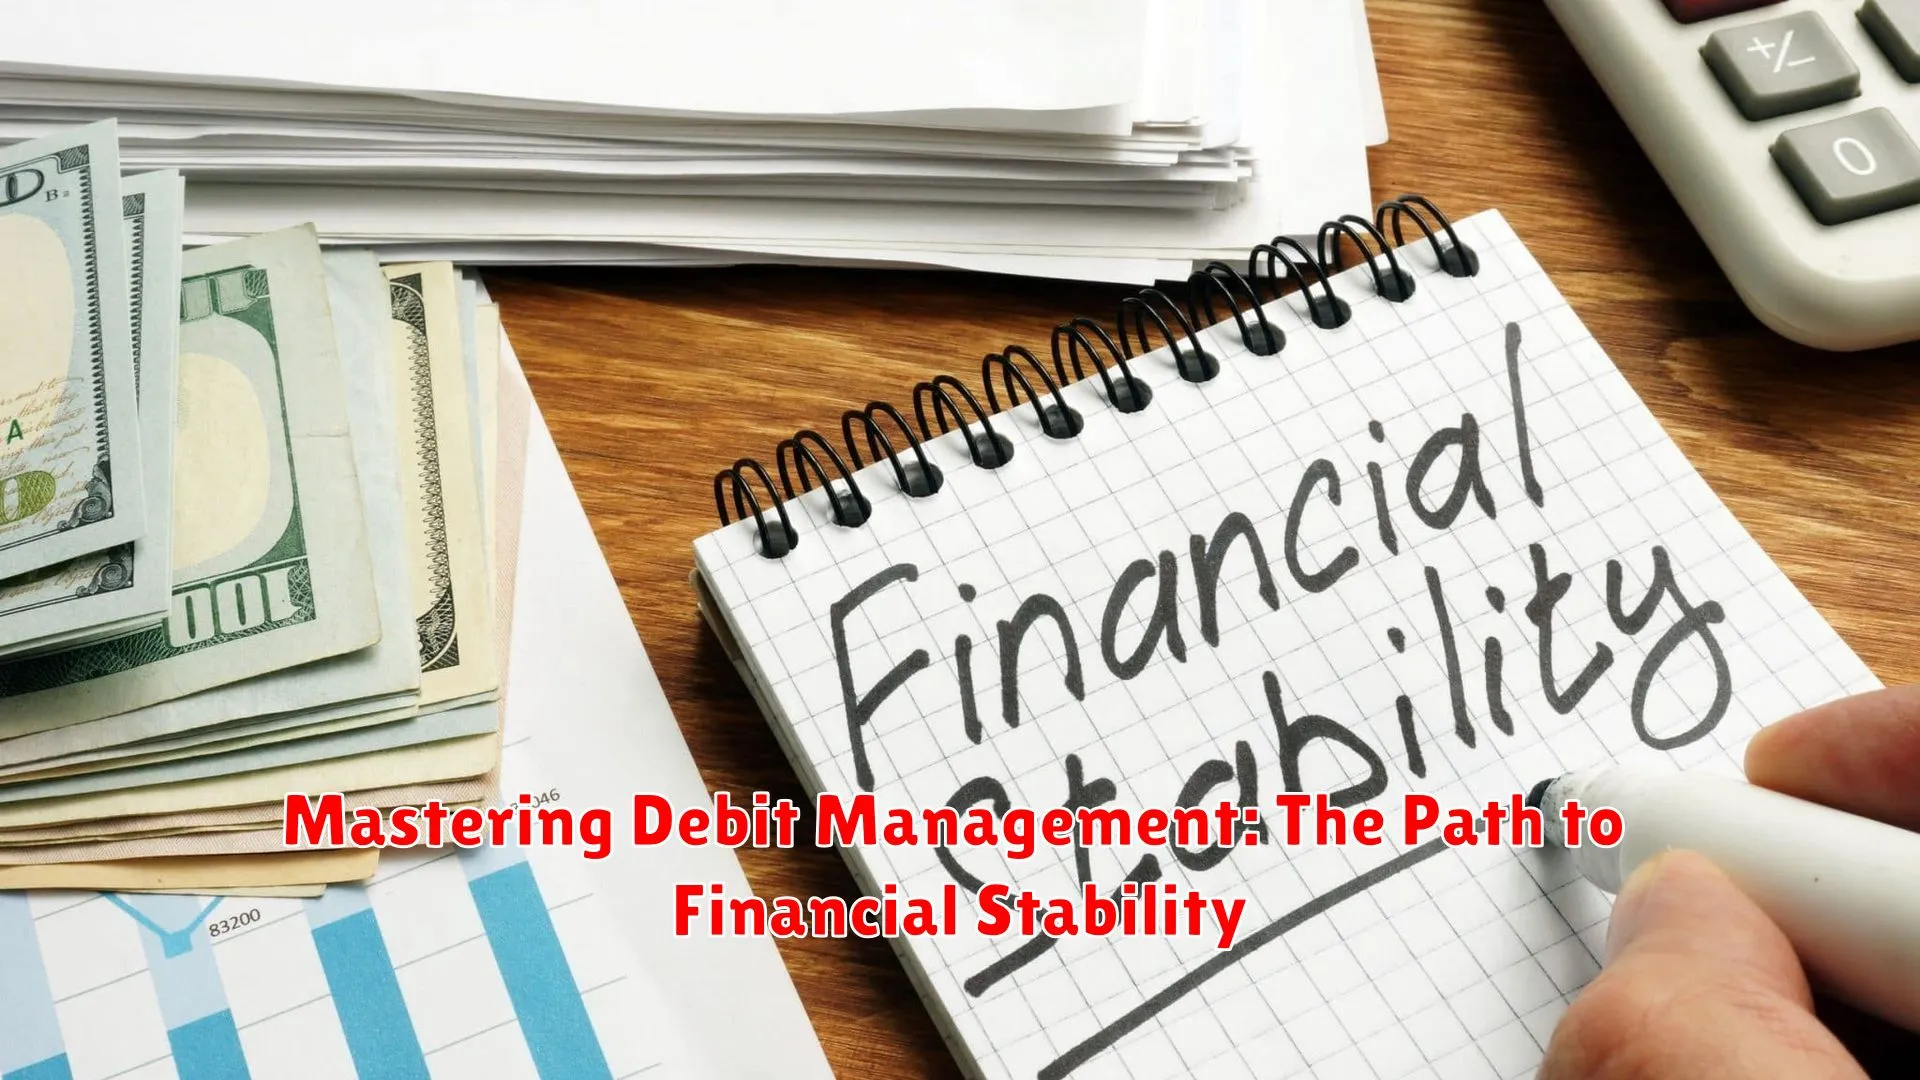 Mastering Debit Management: The Path to Financial Stability